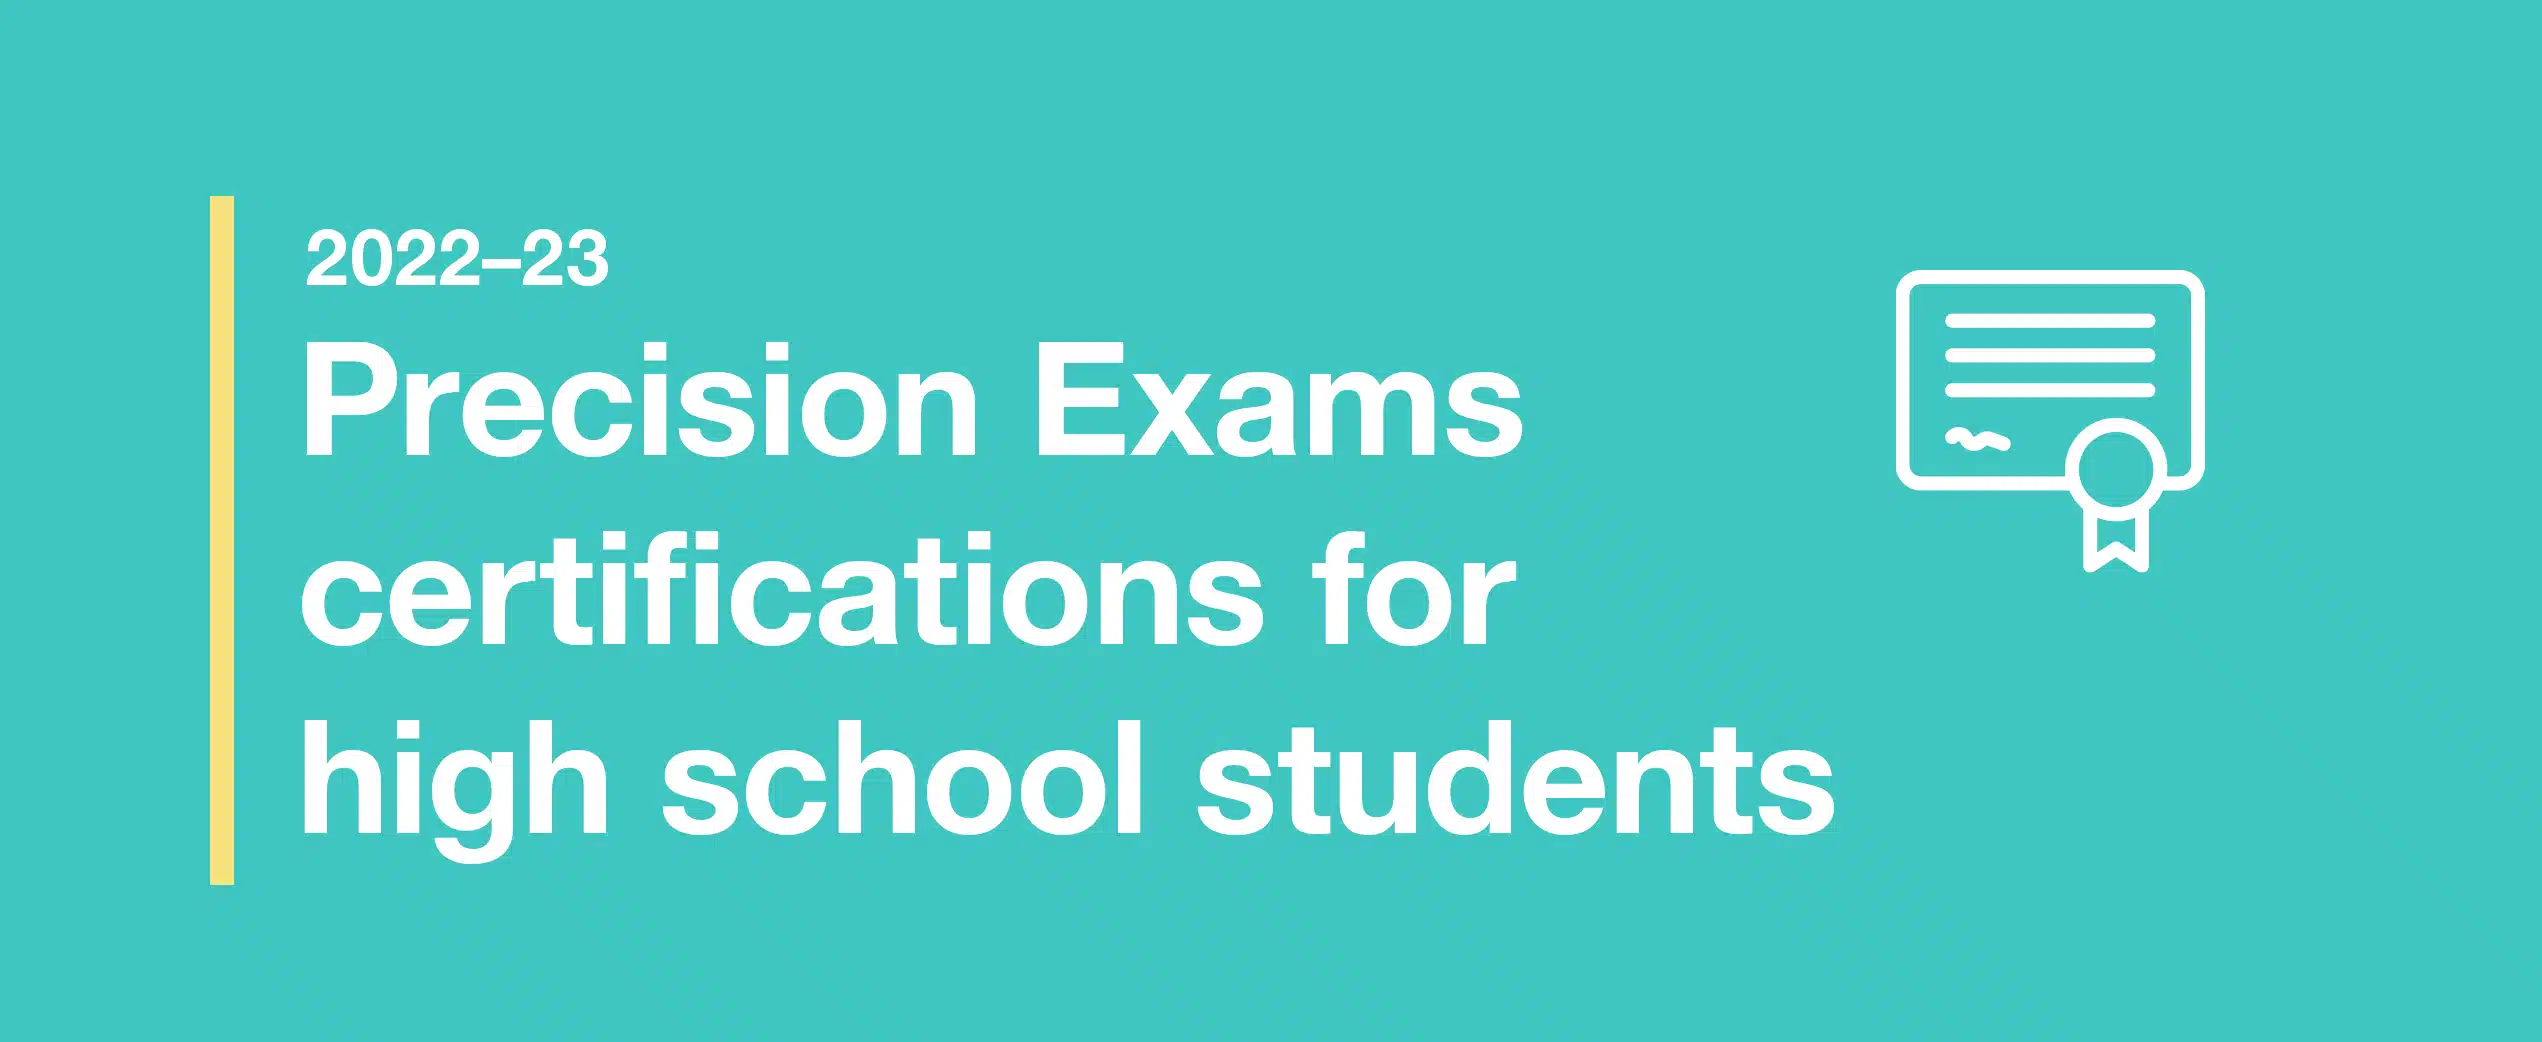 2022–23 Precision Exams certifications for high school students feature image